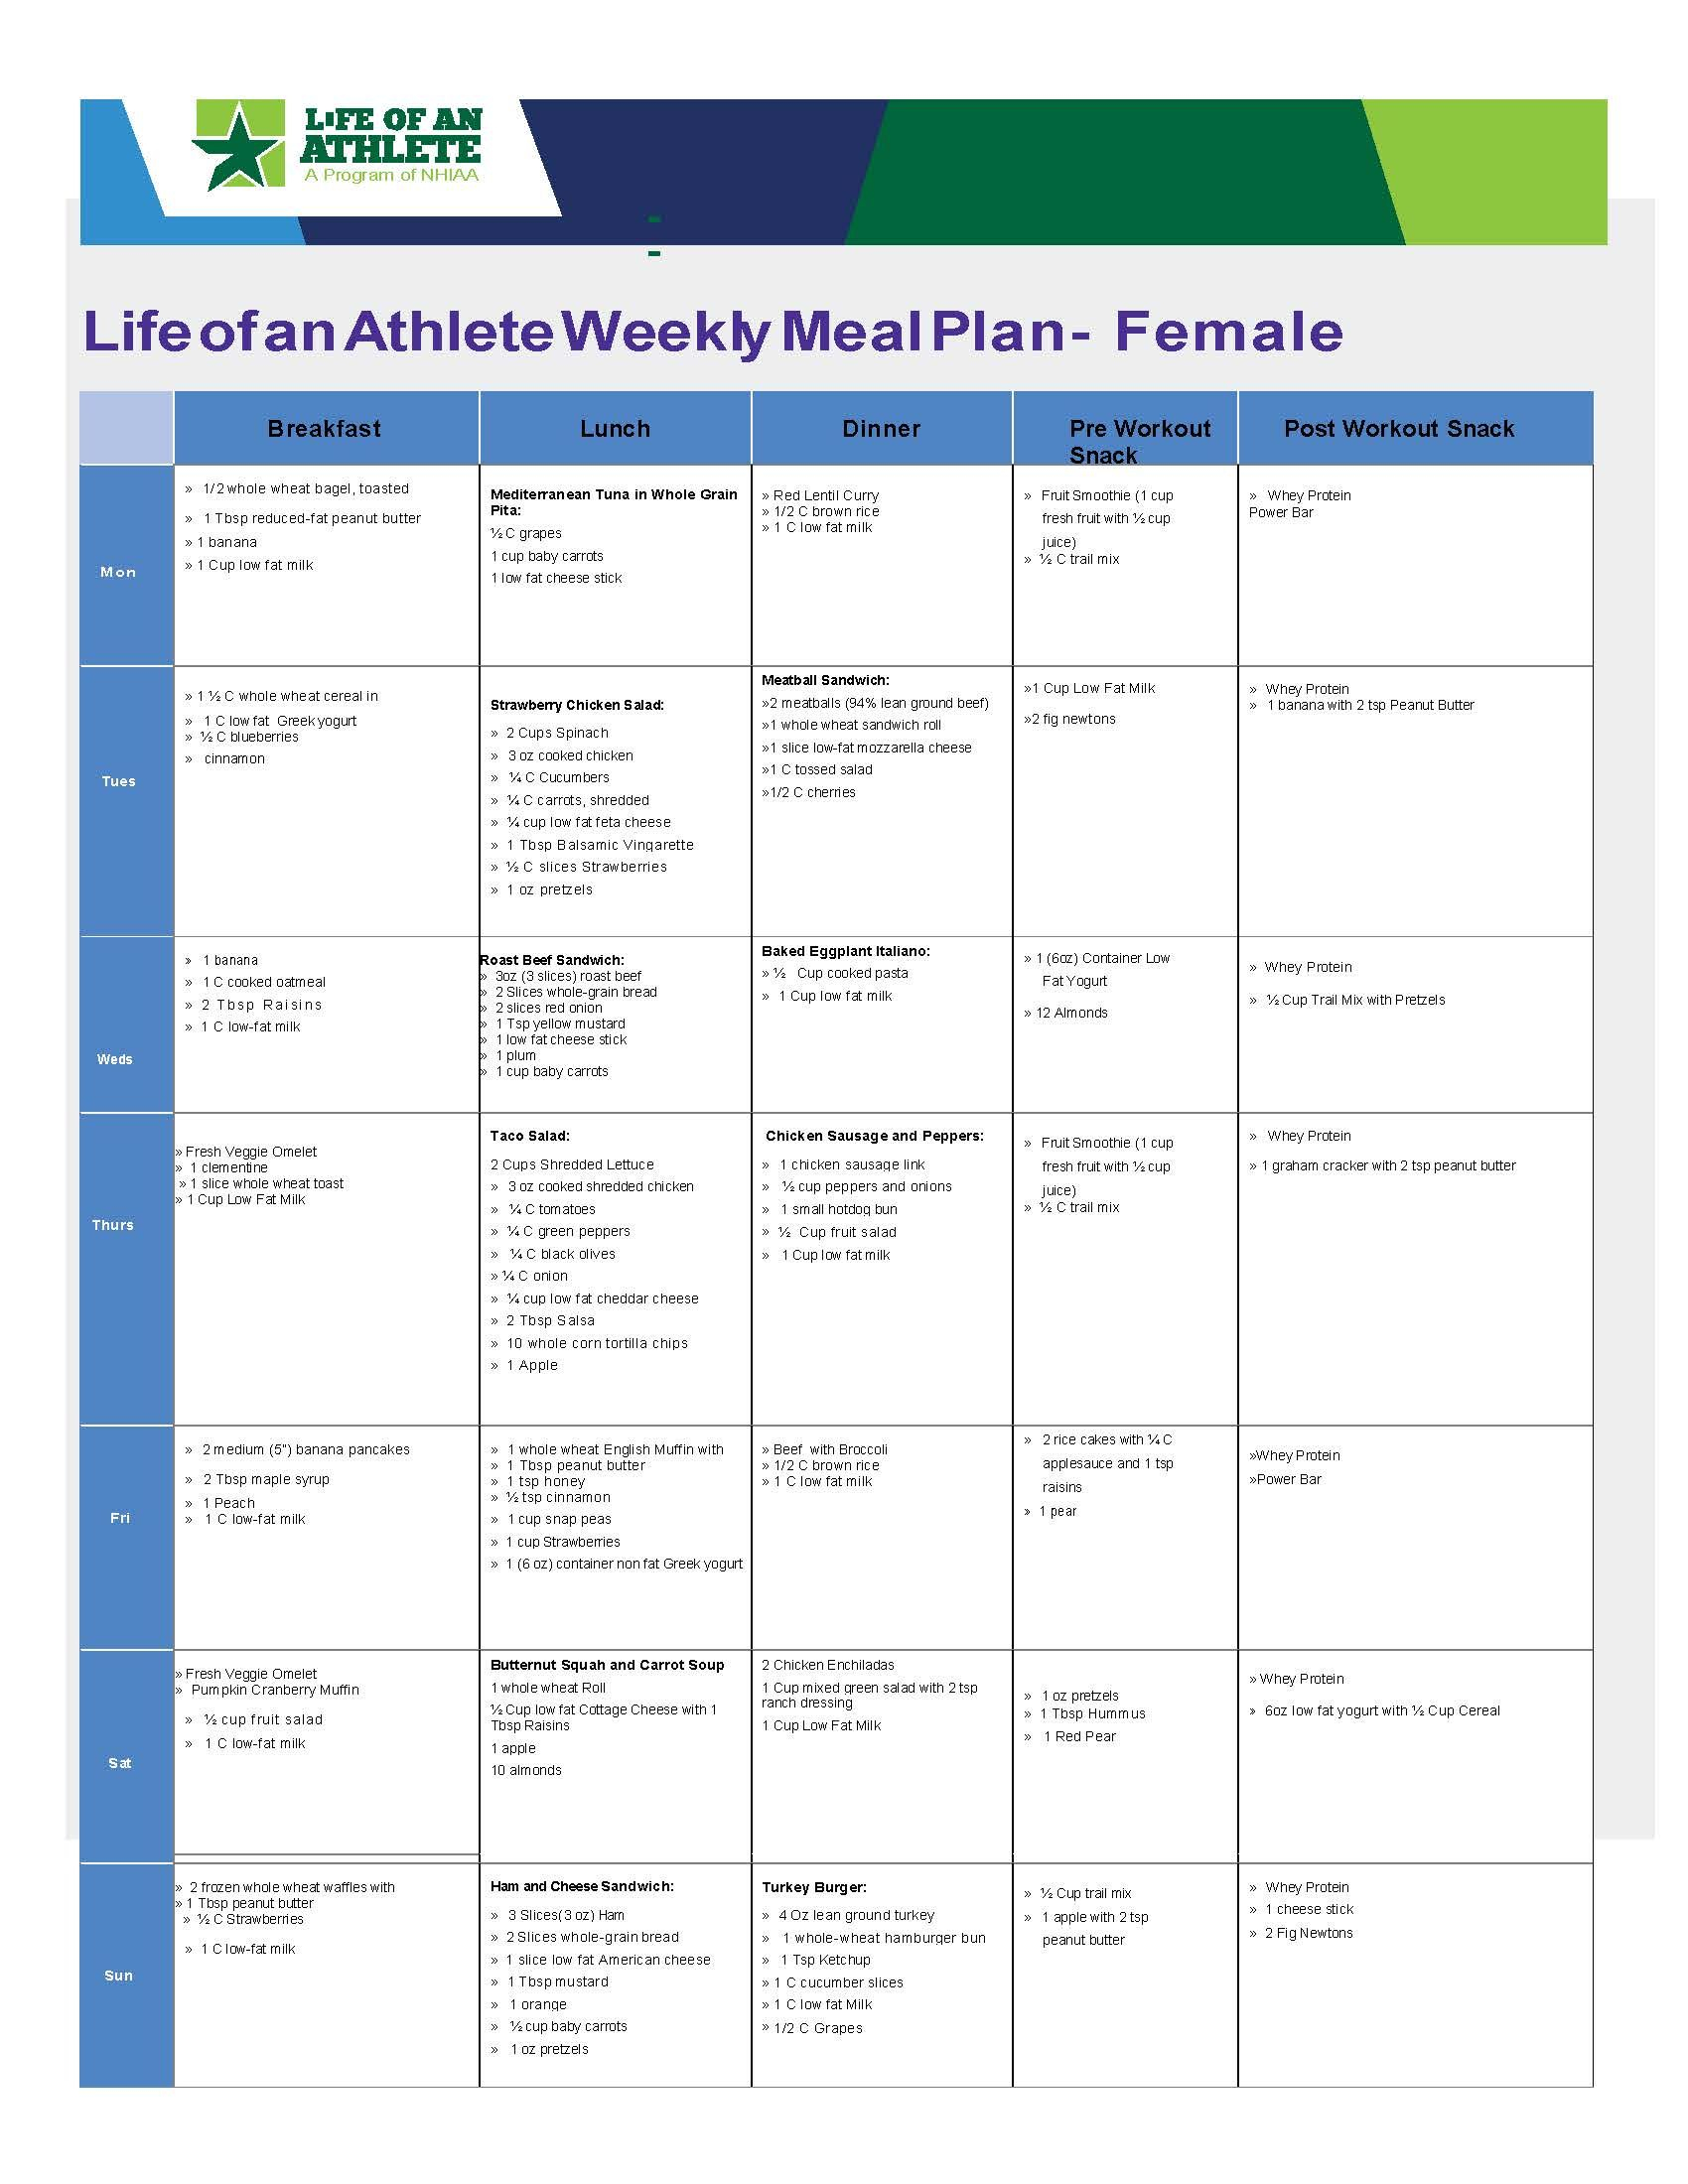 Pin On Weekly Meal Plans From Life Of An Athlete